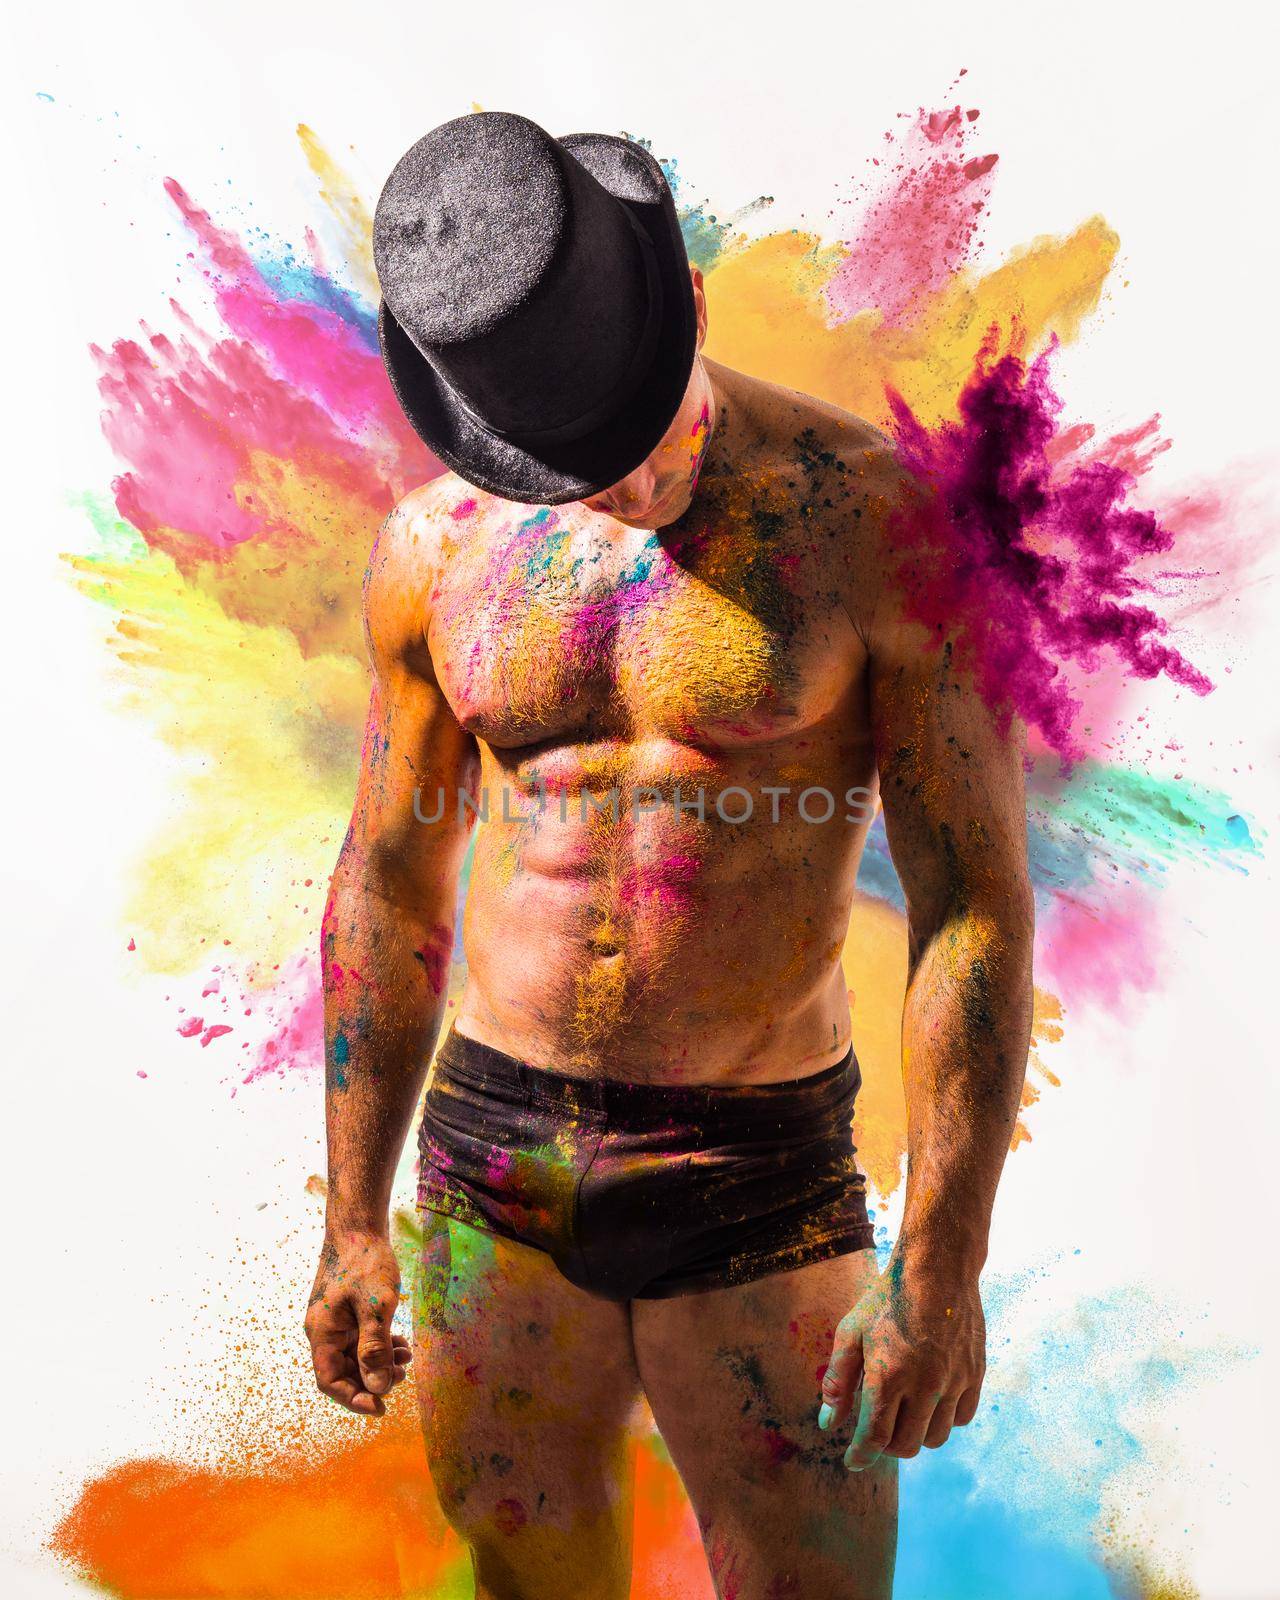 Muscular man shirtless with skin painted with Holi colors by artofphoto